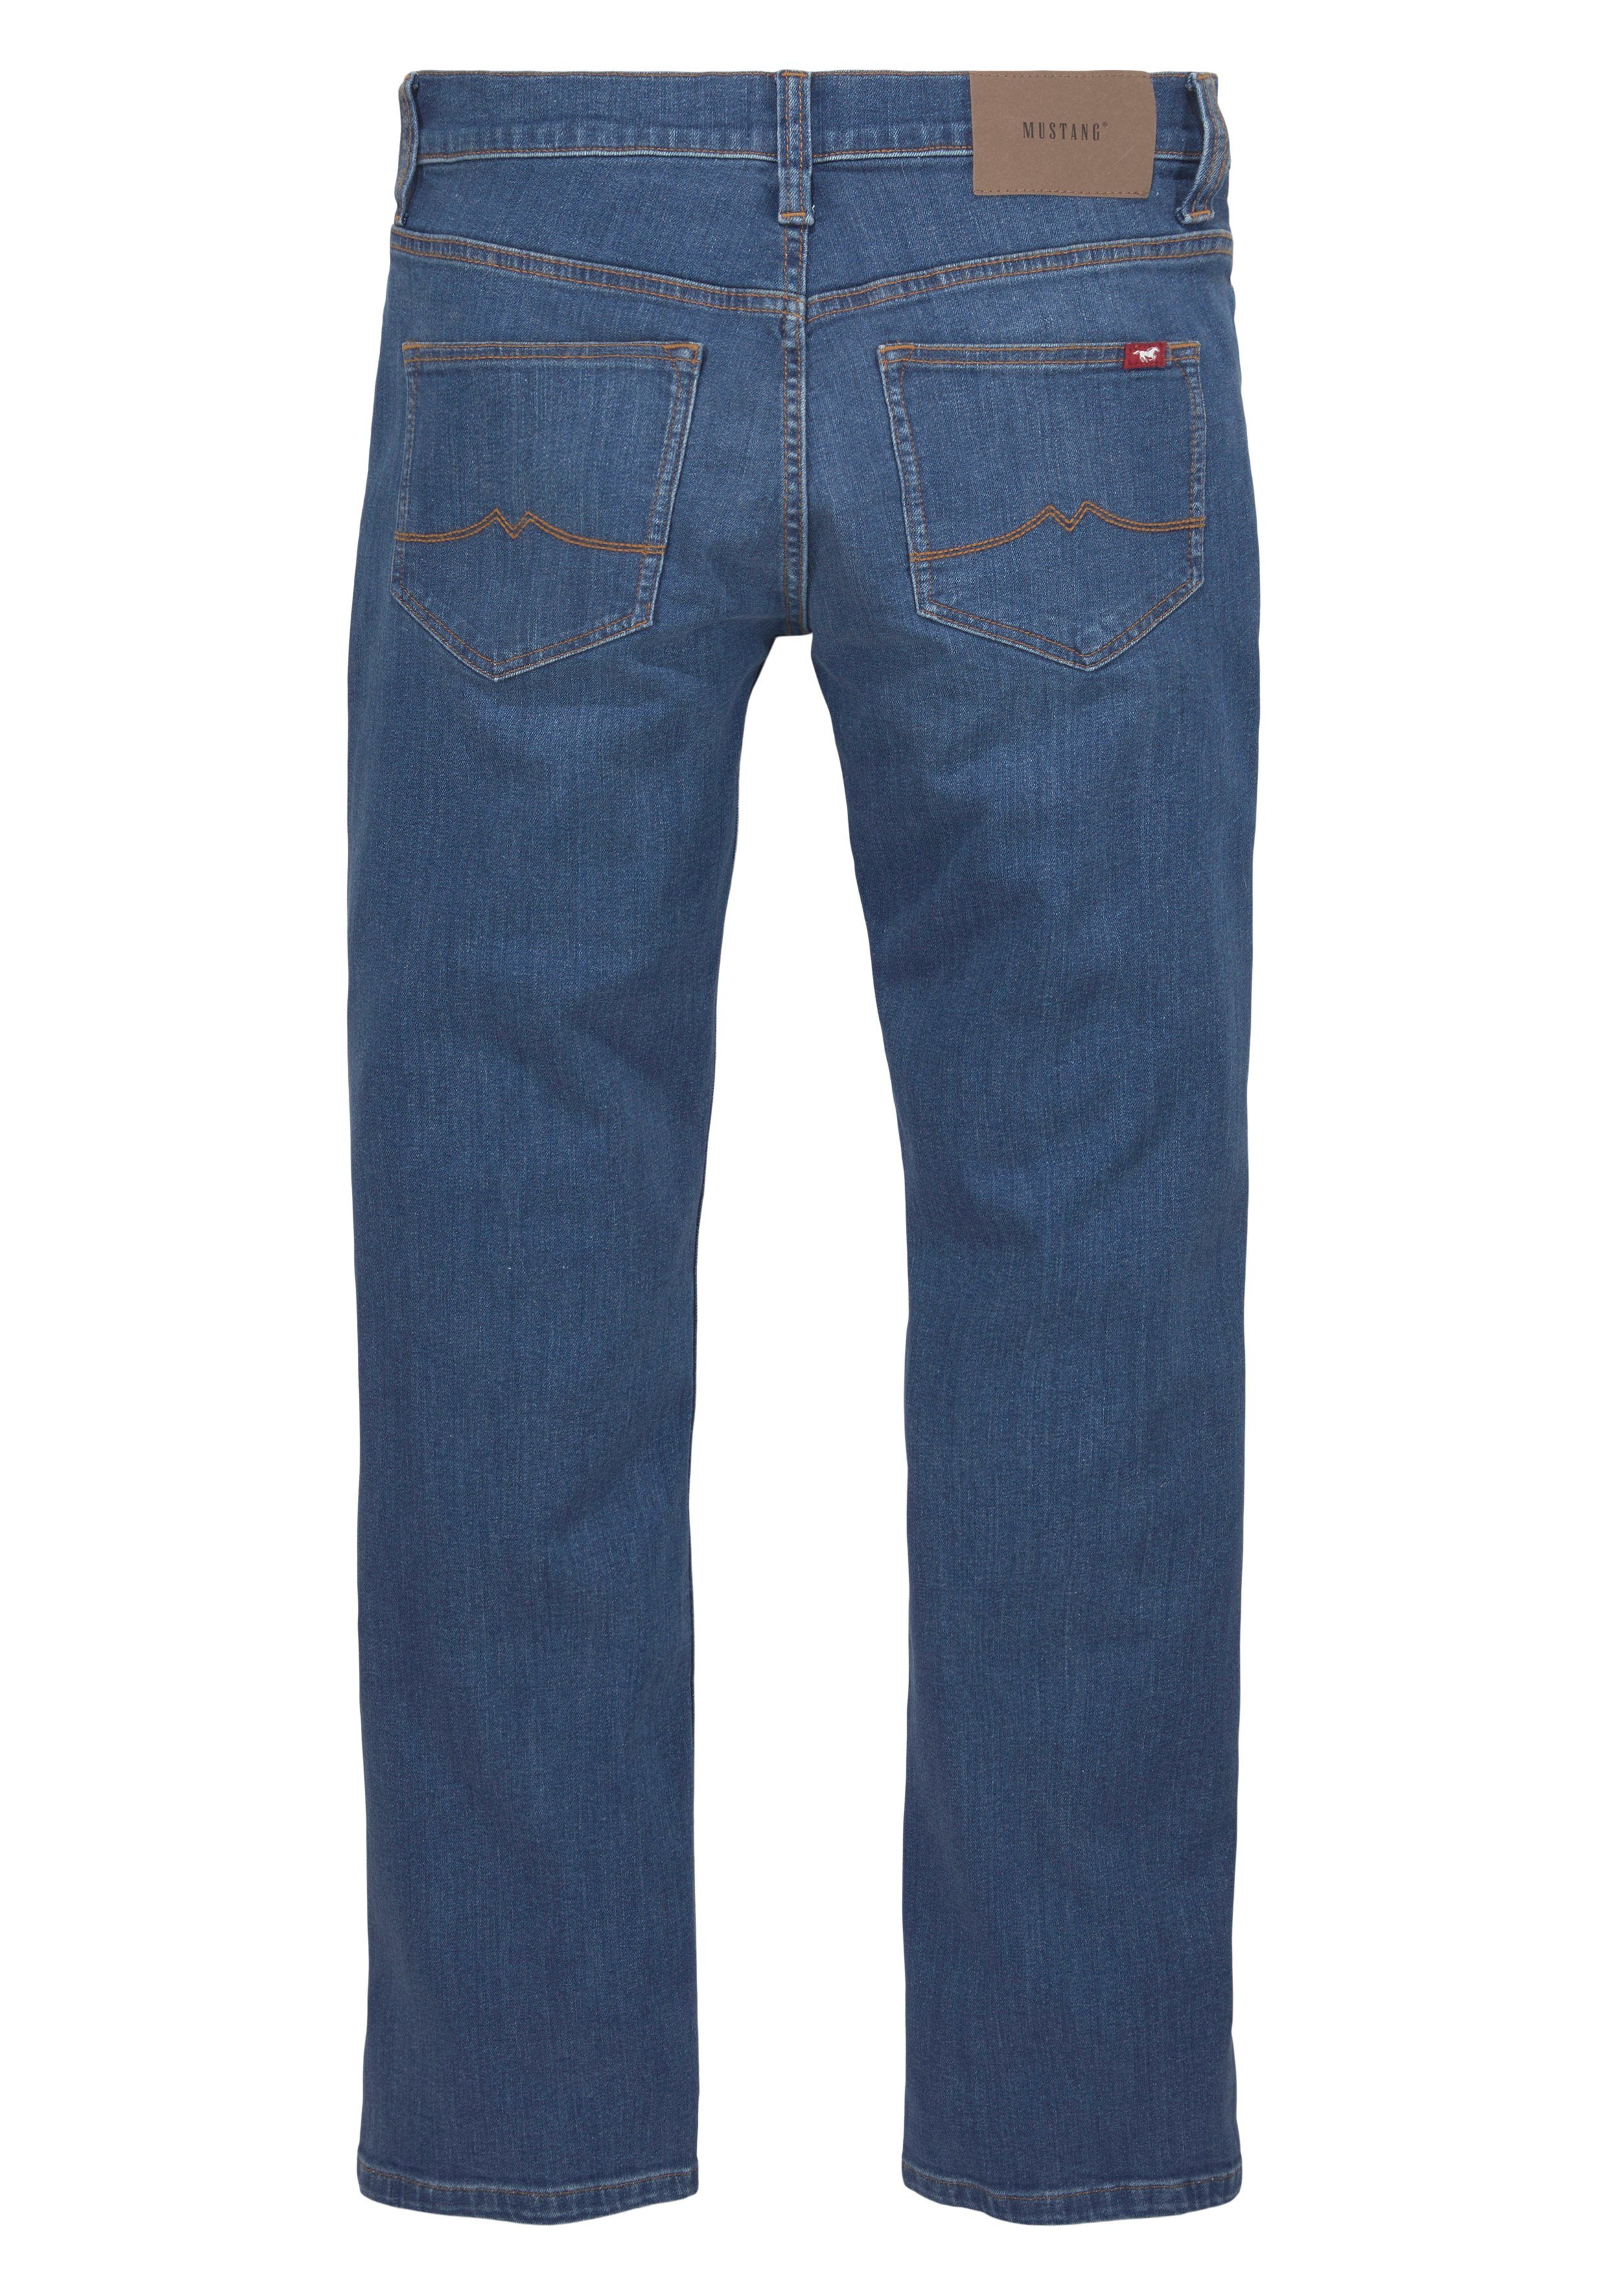 OREGON dark wash Bootcut-Jeans blue STYLE MUSTANG BOOTCUT